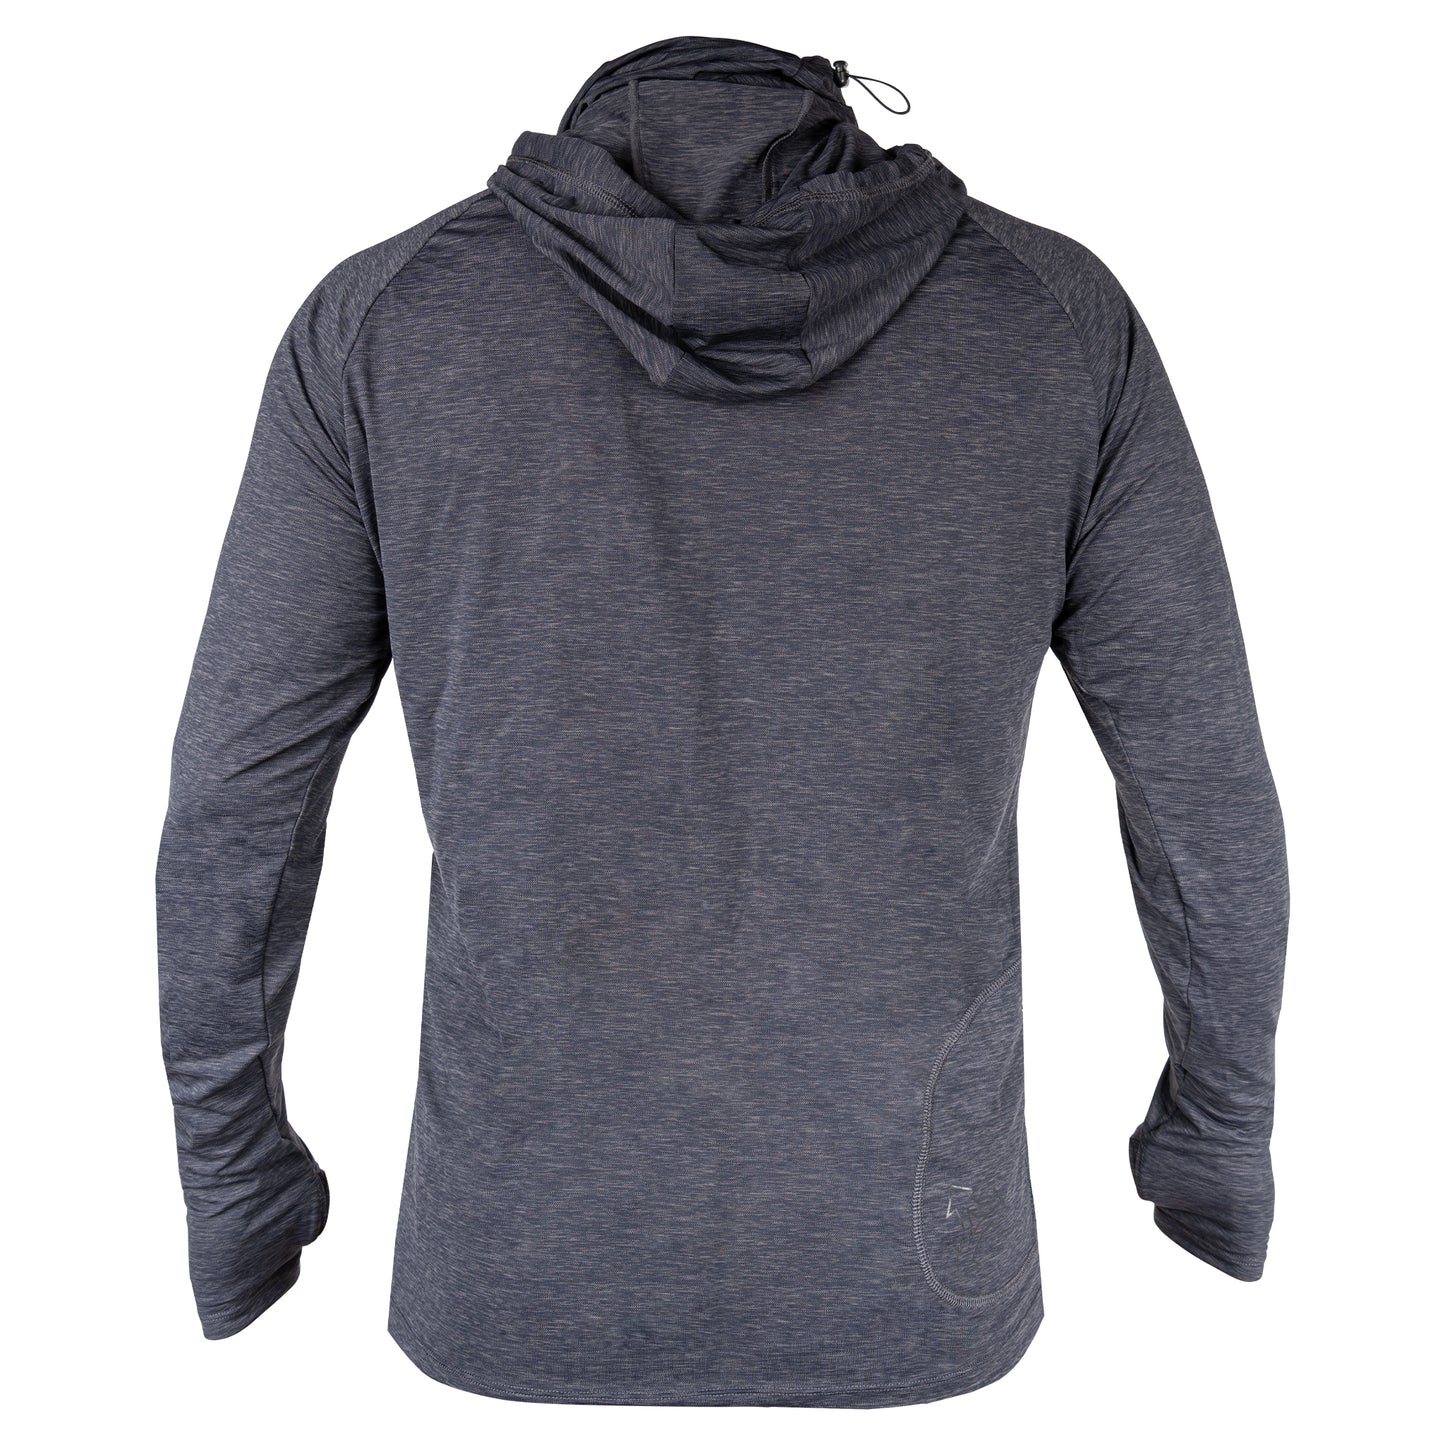 Men's Heathered VentX Hooded Pullover Top W/Face Cover UV